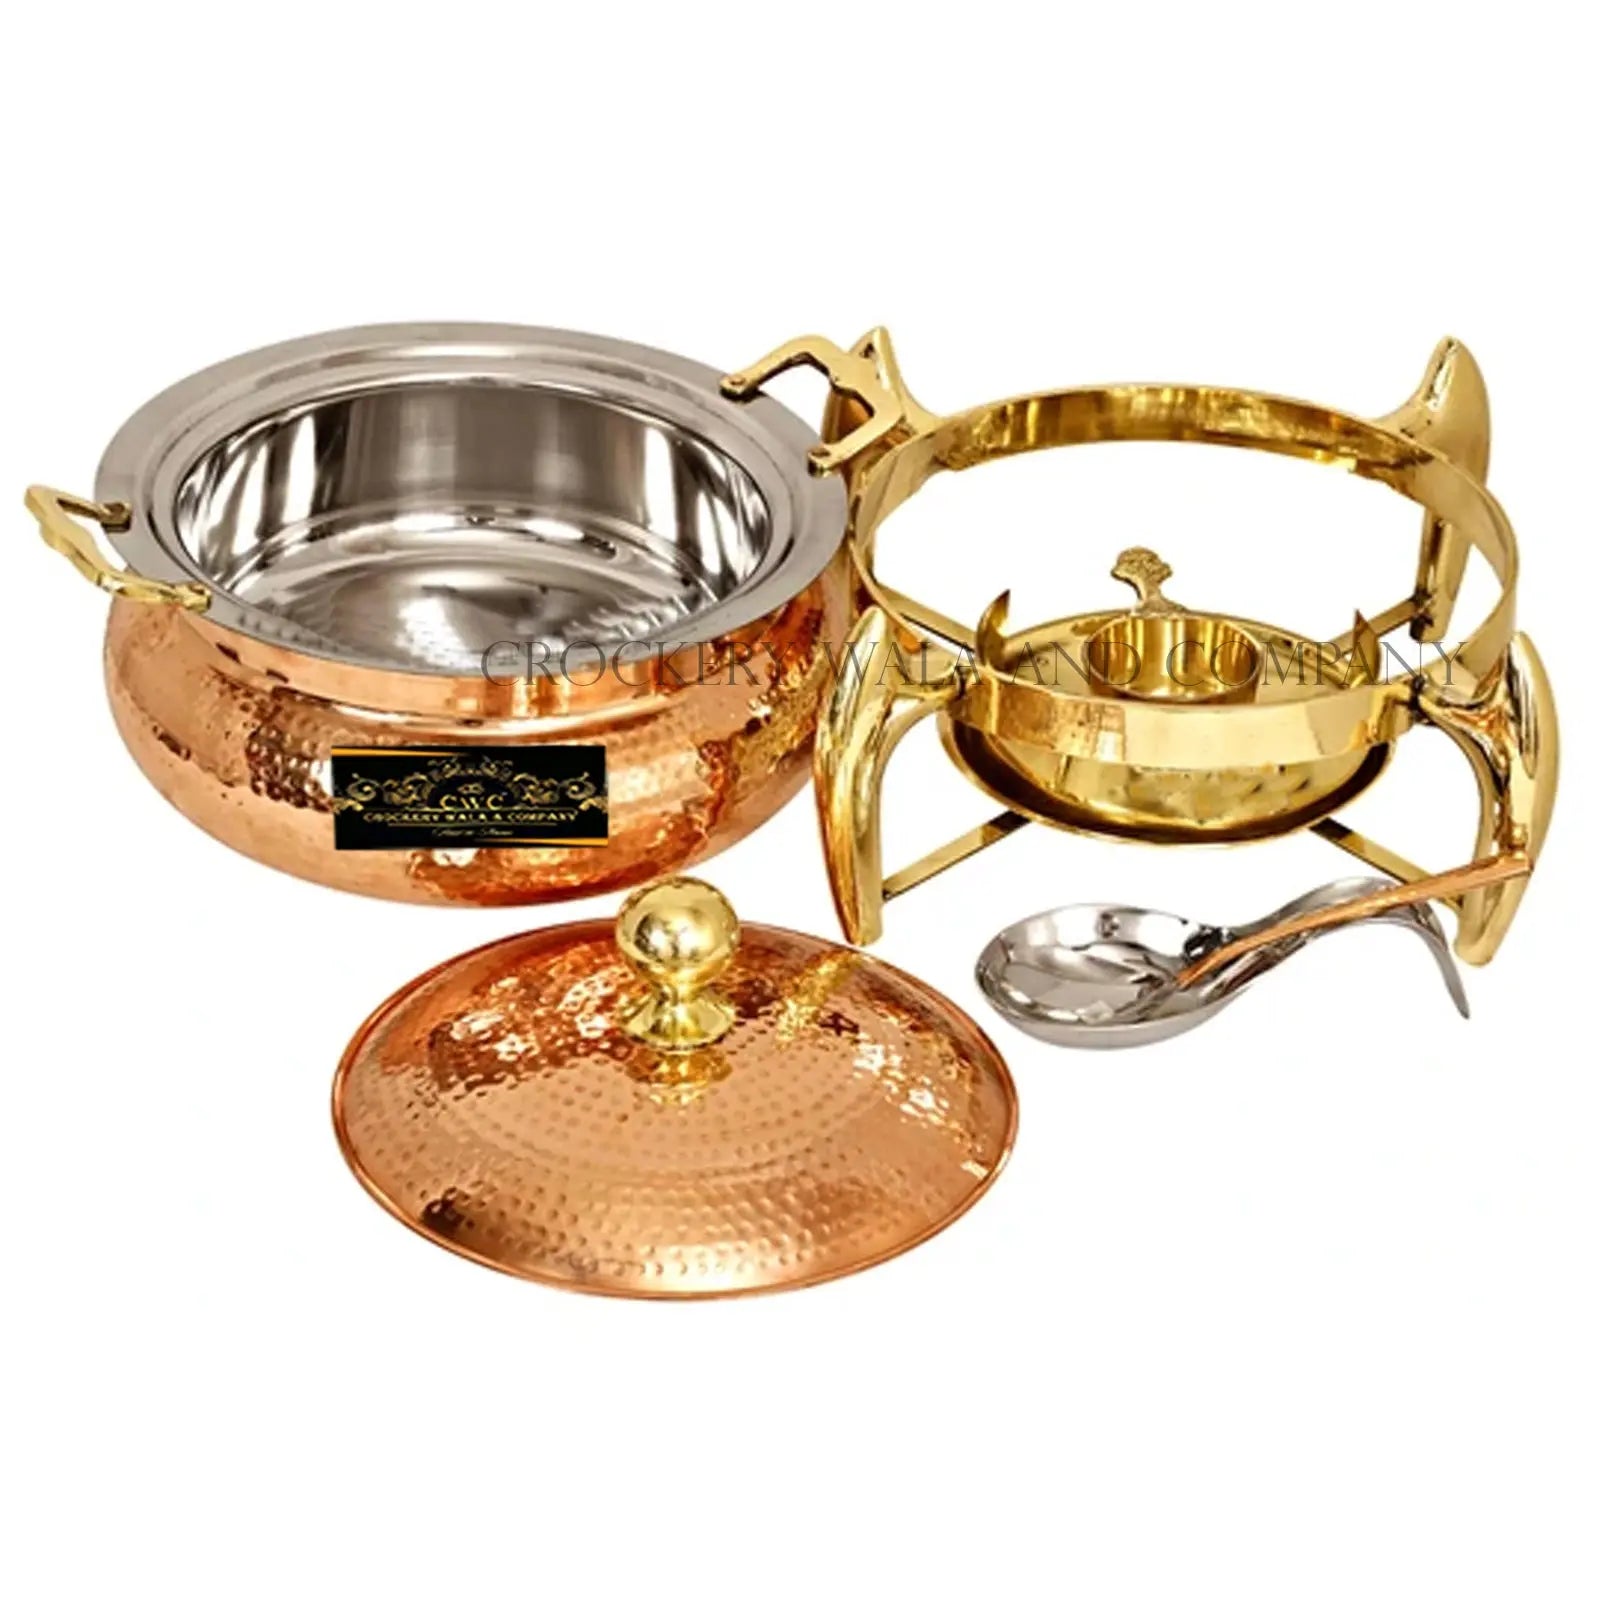 Crockery Wala And Company Pure Copper Kalai Chaffing Dish Hammered Design With Serving Spoon and Fuel Gel Stand 6000 ML - CROCKERY WALA AND COMPANY 